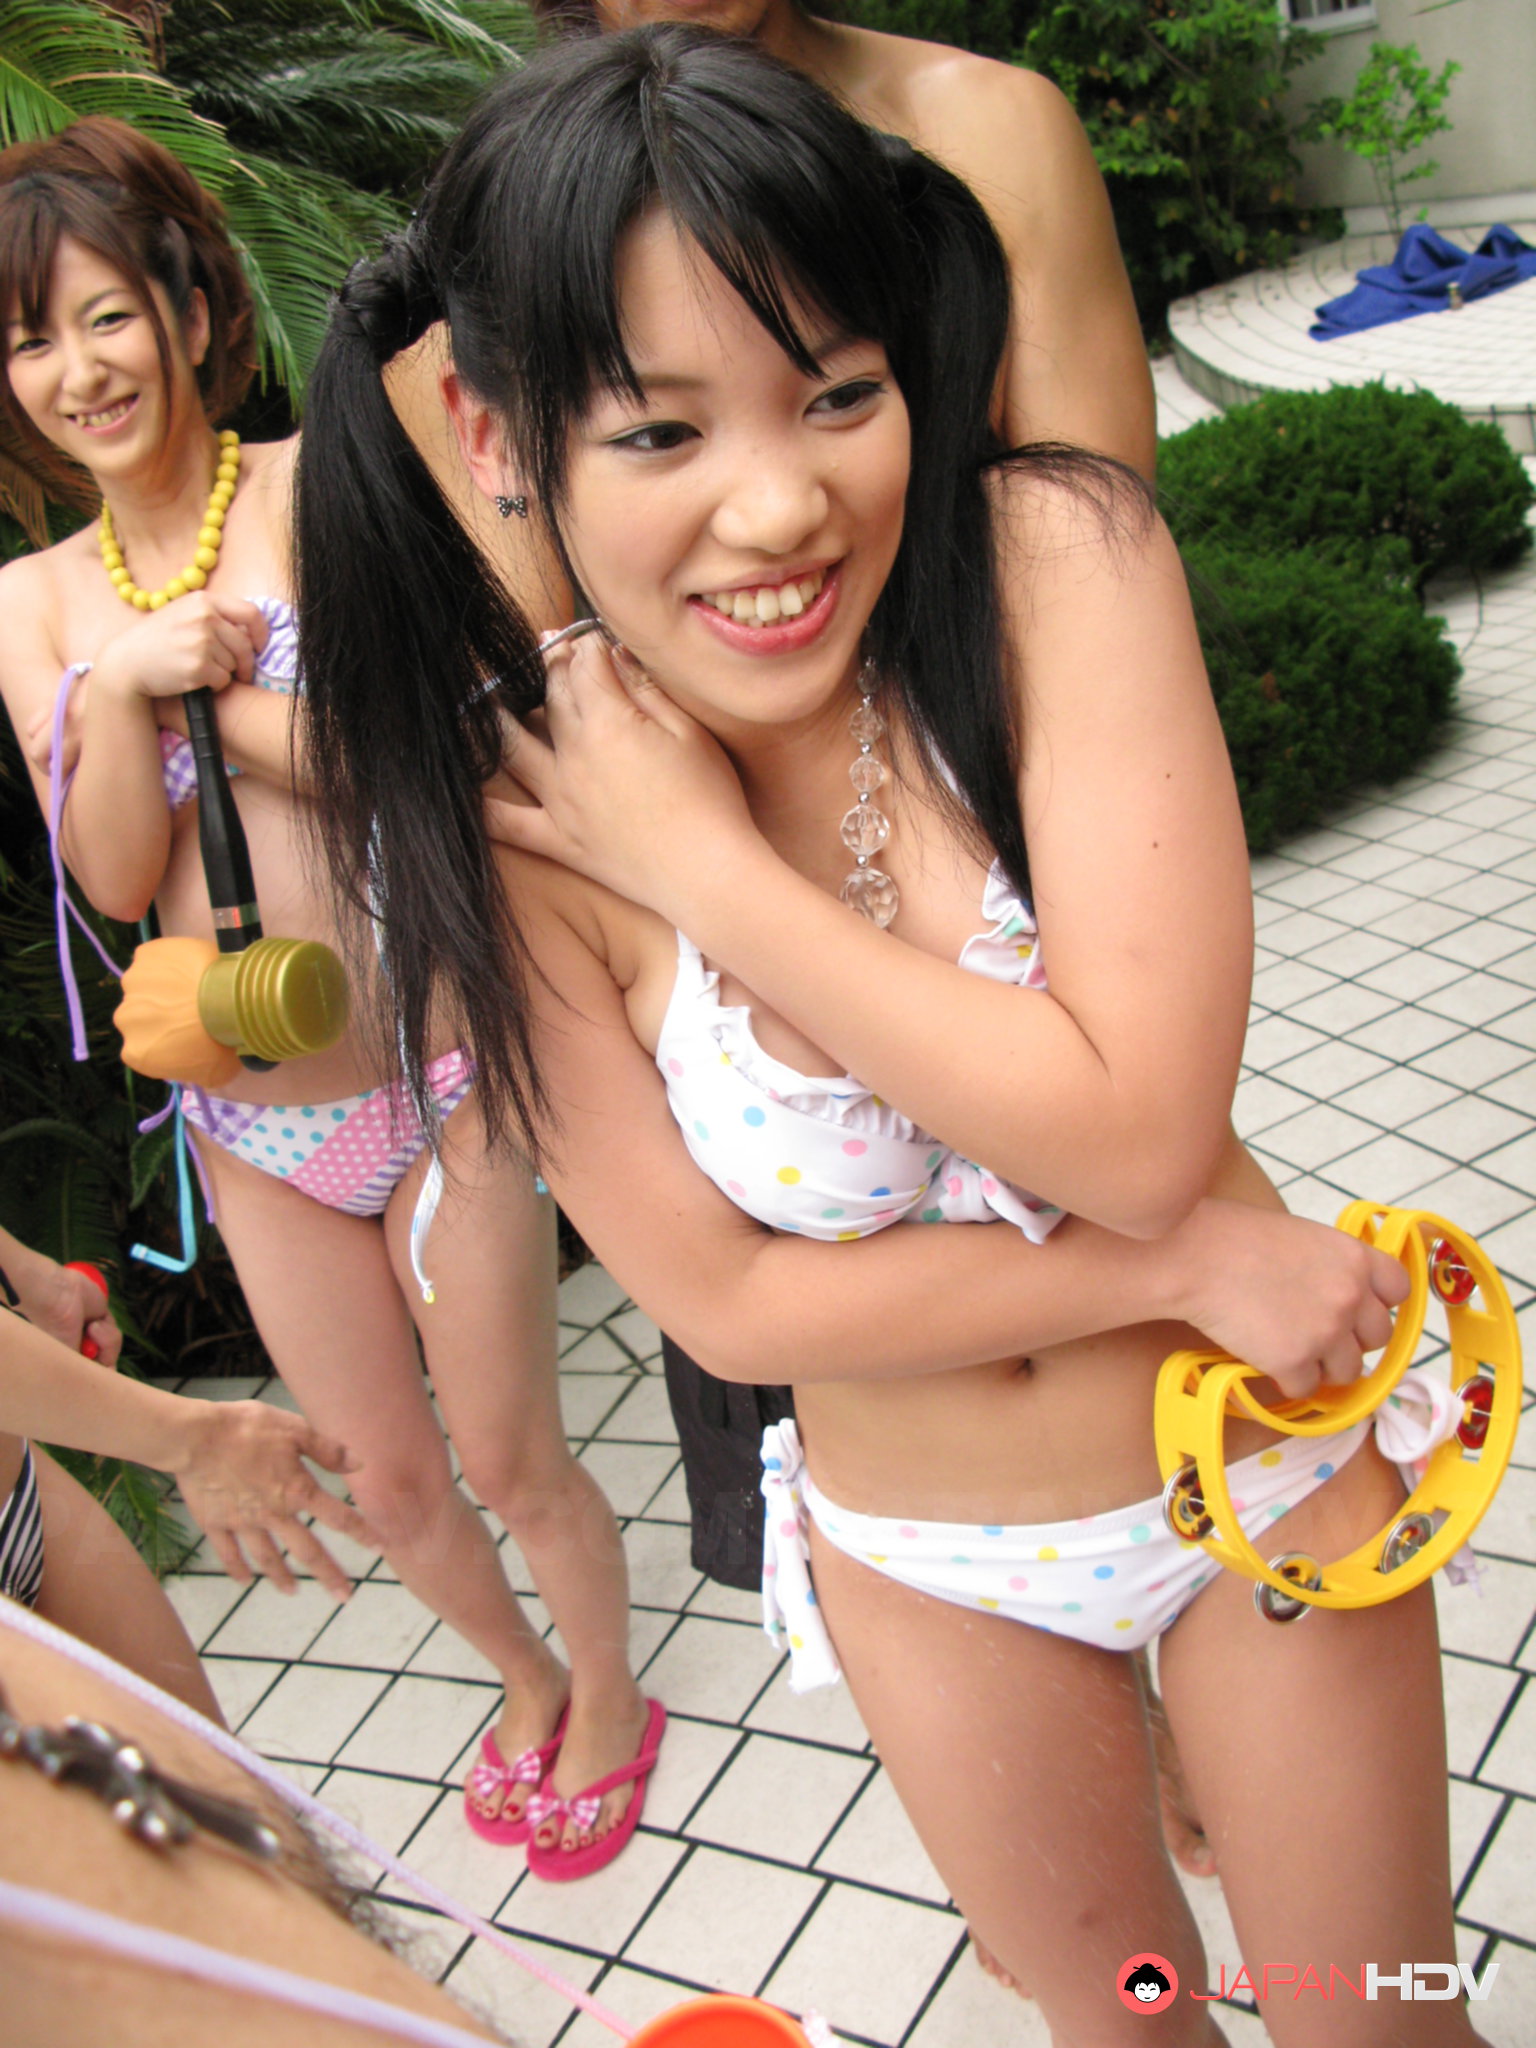 Sexy Nudist Party - Japanese girls enjoy in some sexy pool party